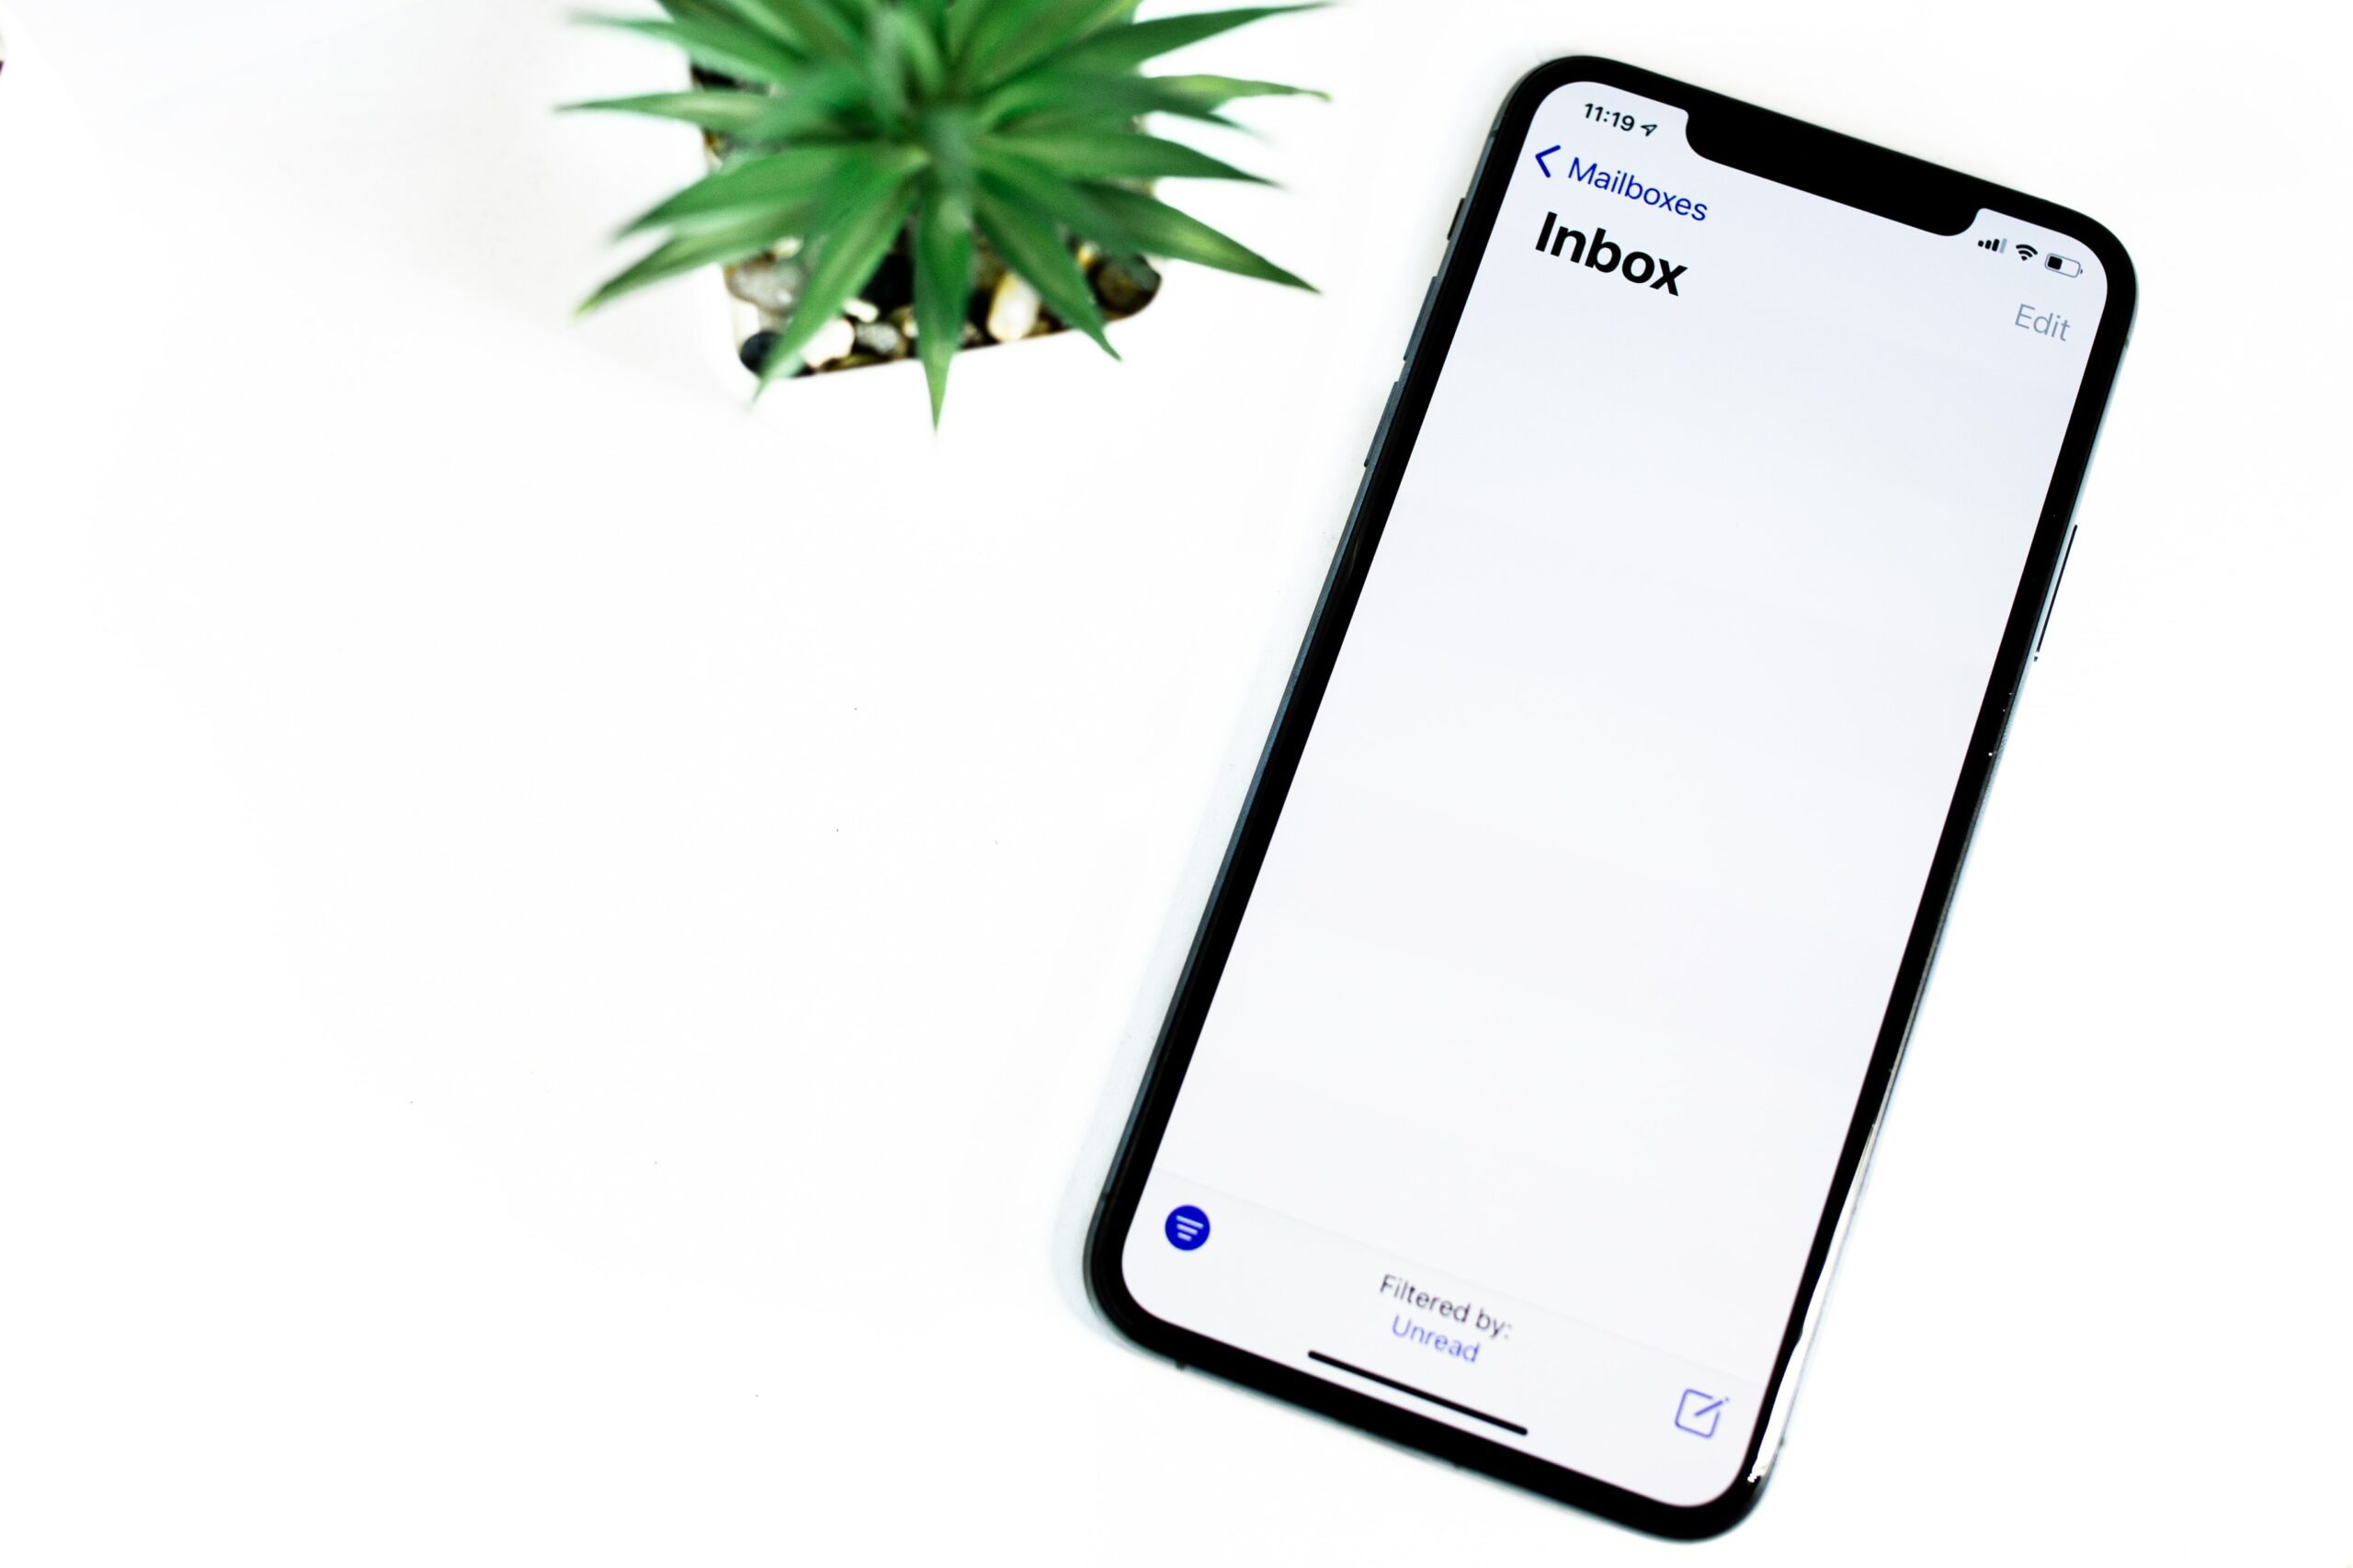 An iPhone next to a plant displaying an Outlook email on its screen.